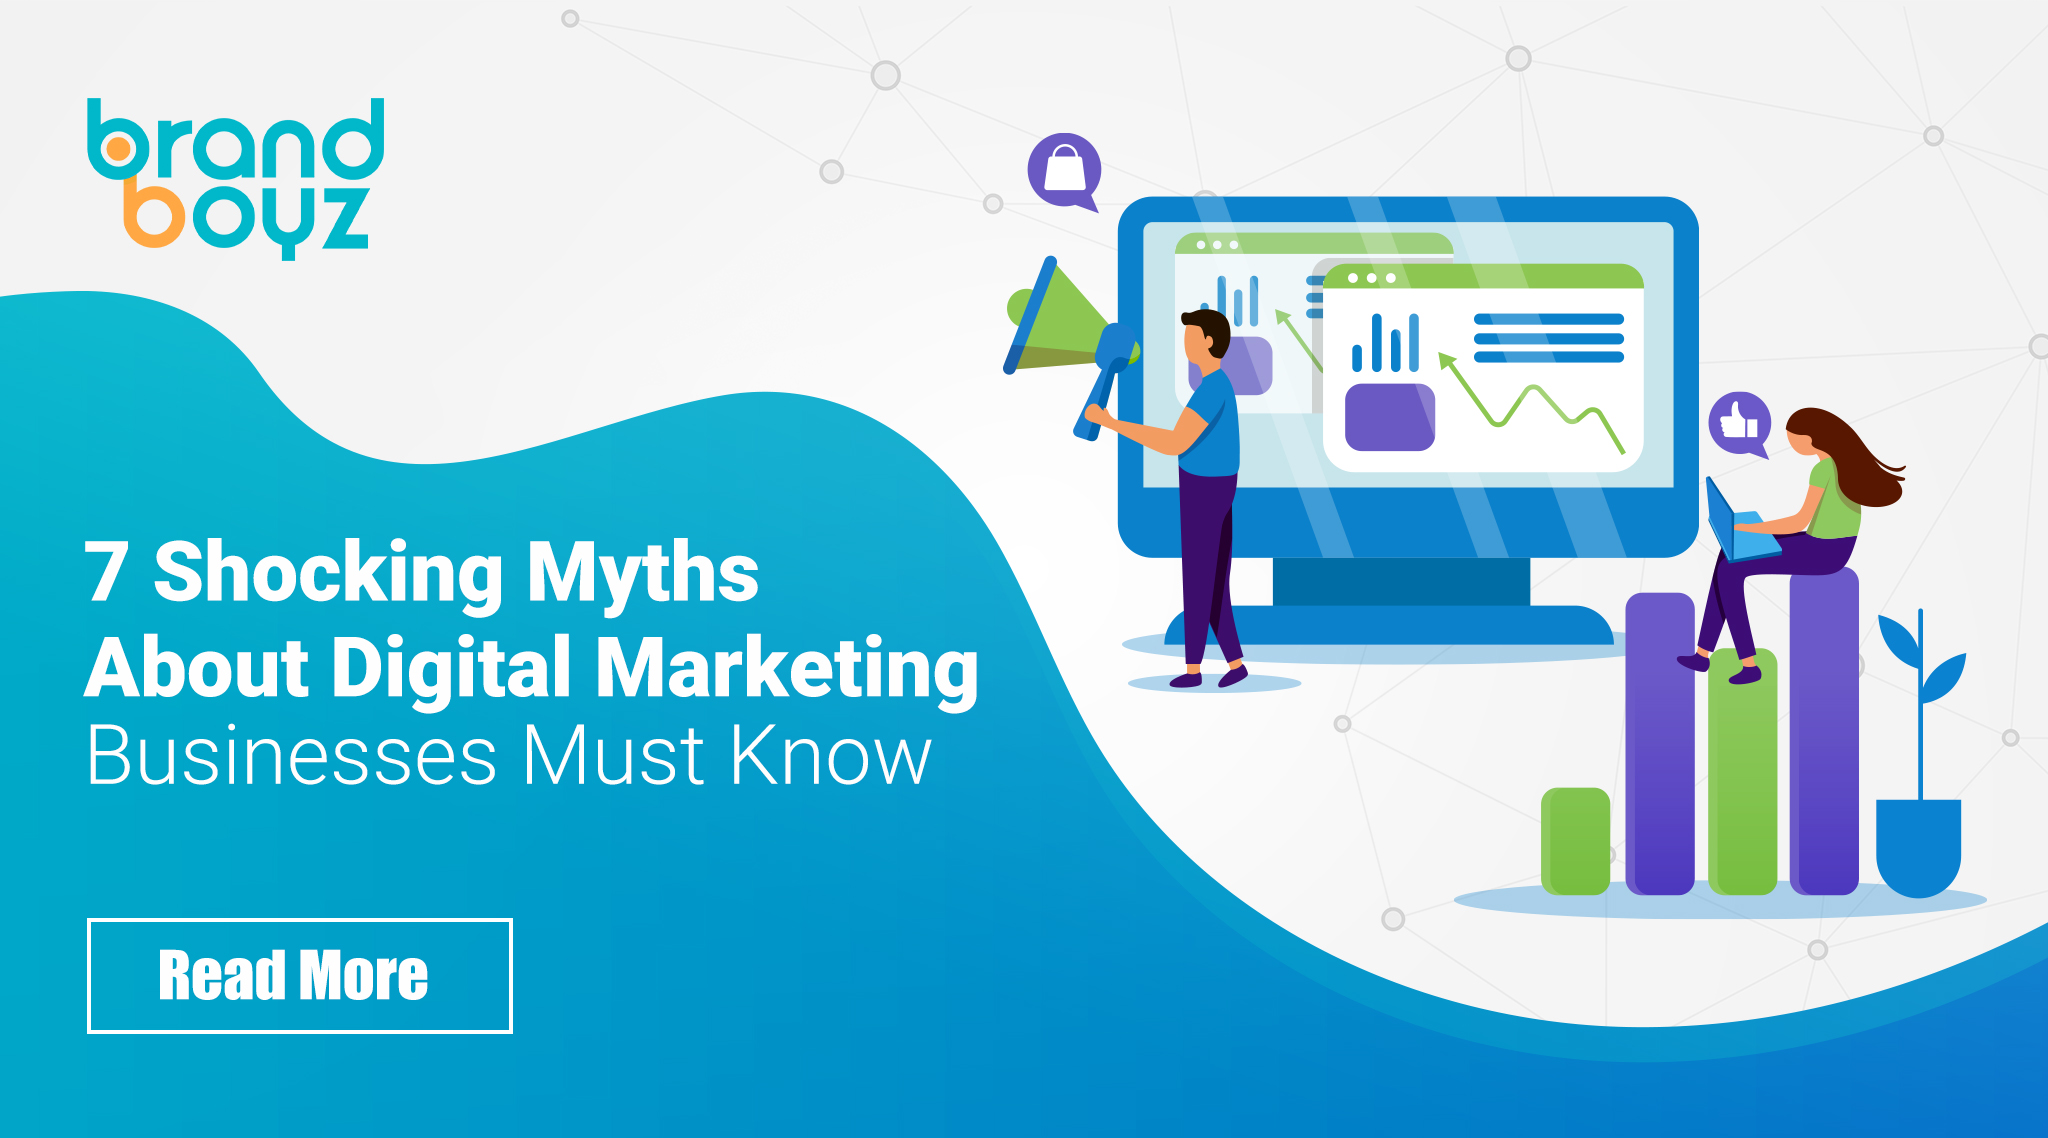 7 Shocking Myths About Digital Marketing - Businesses Must Know